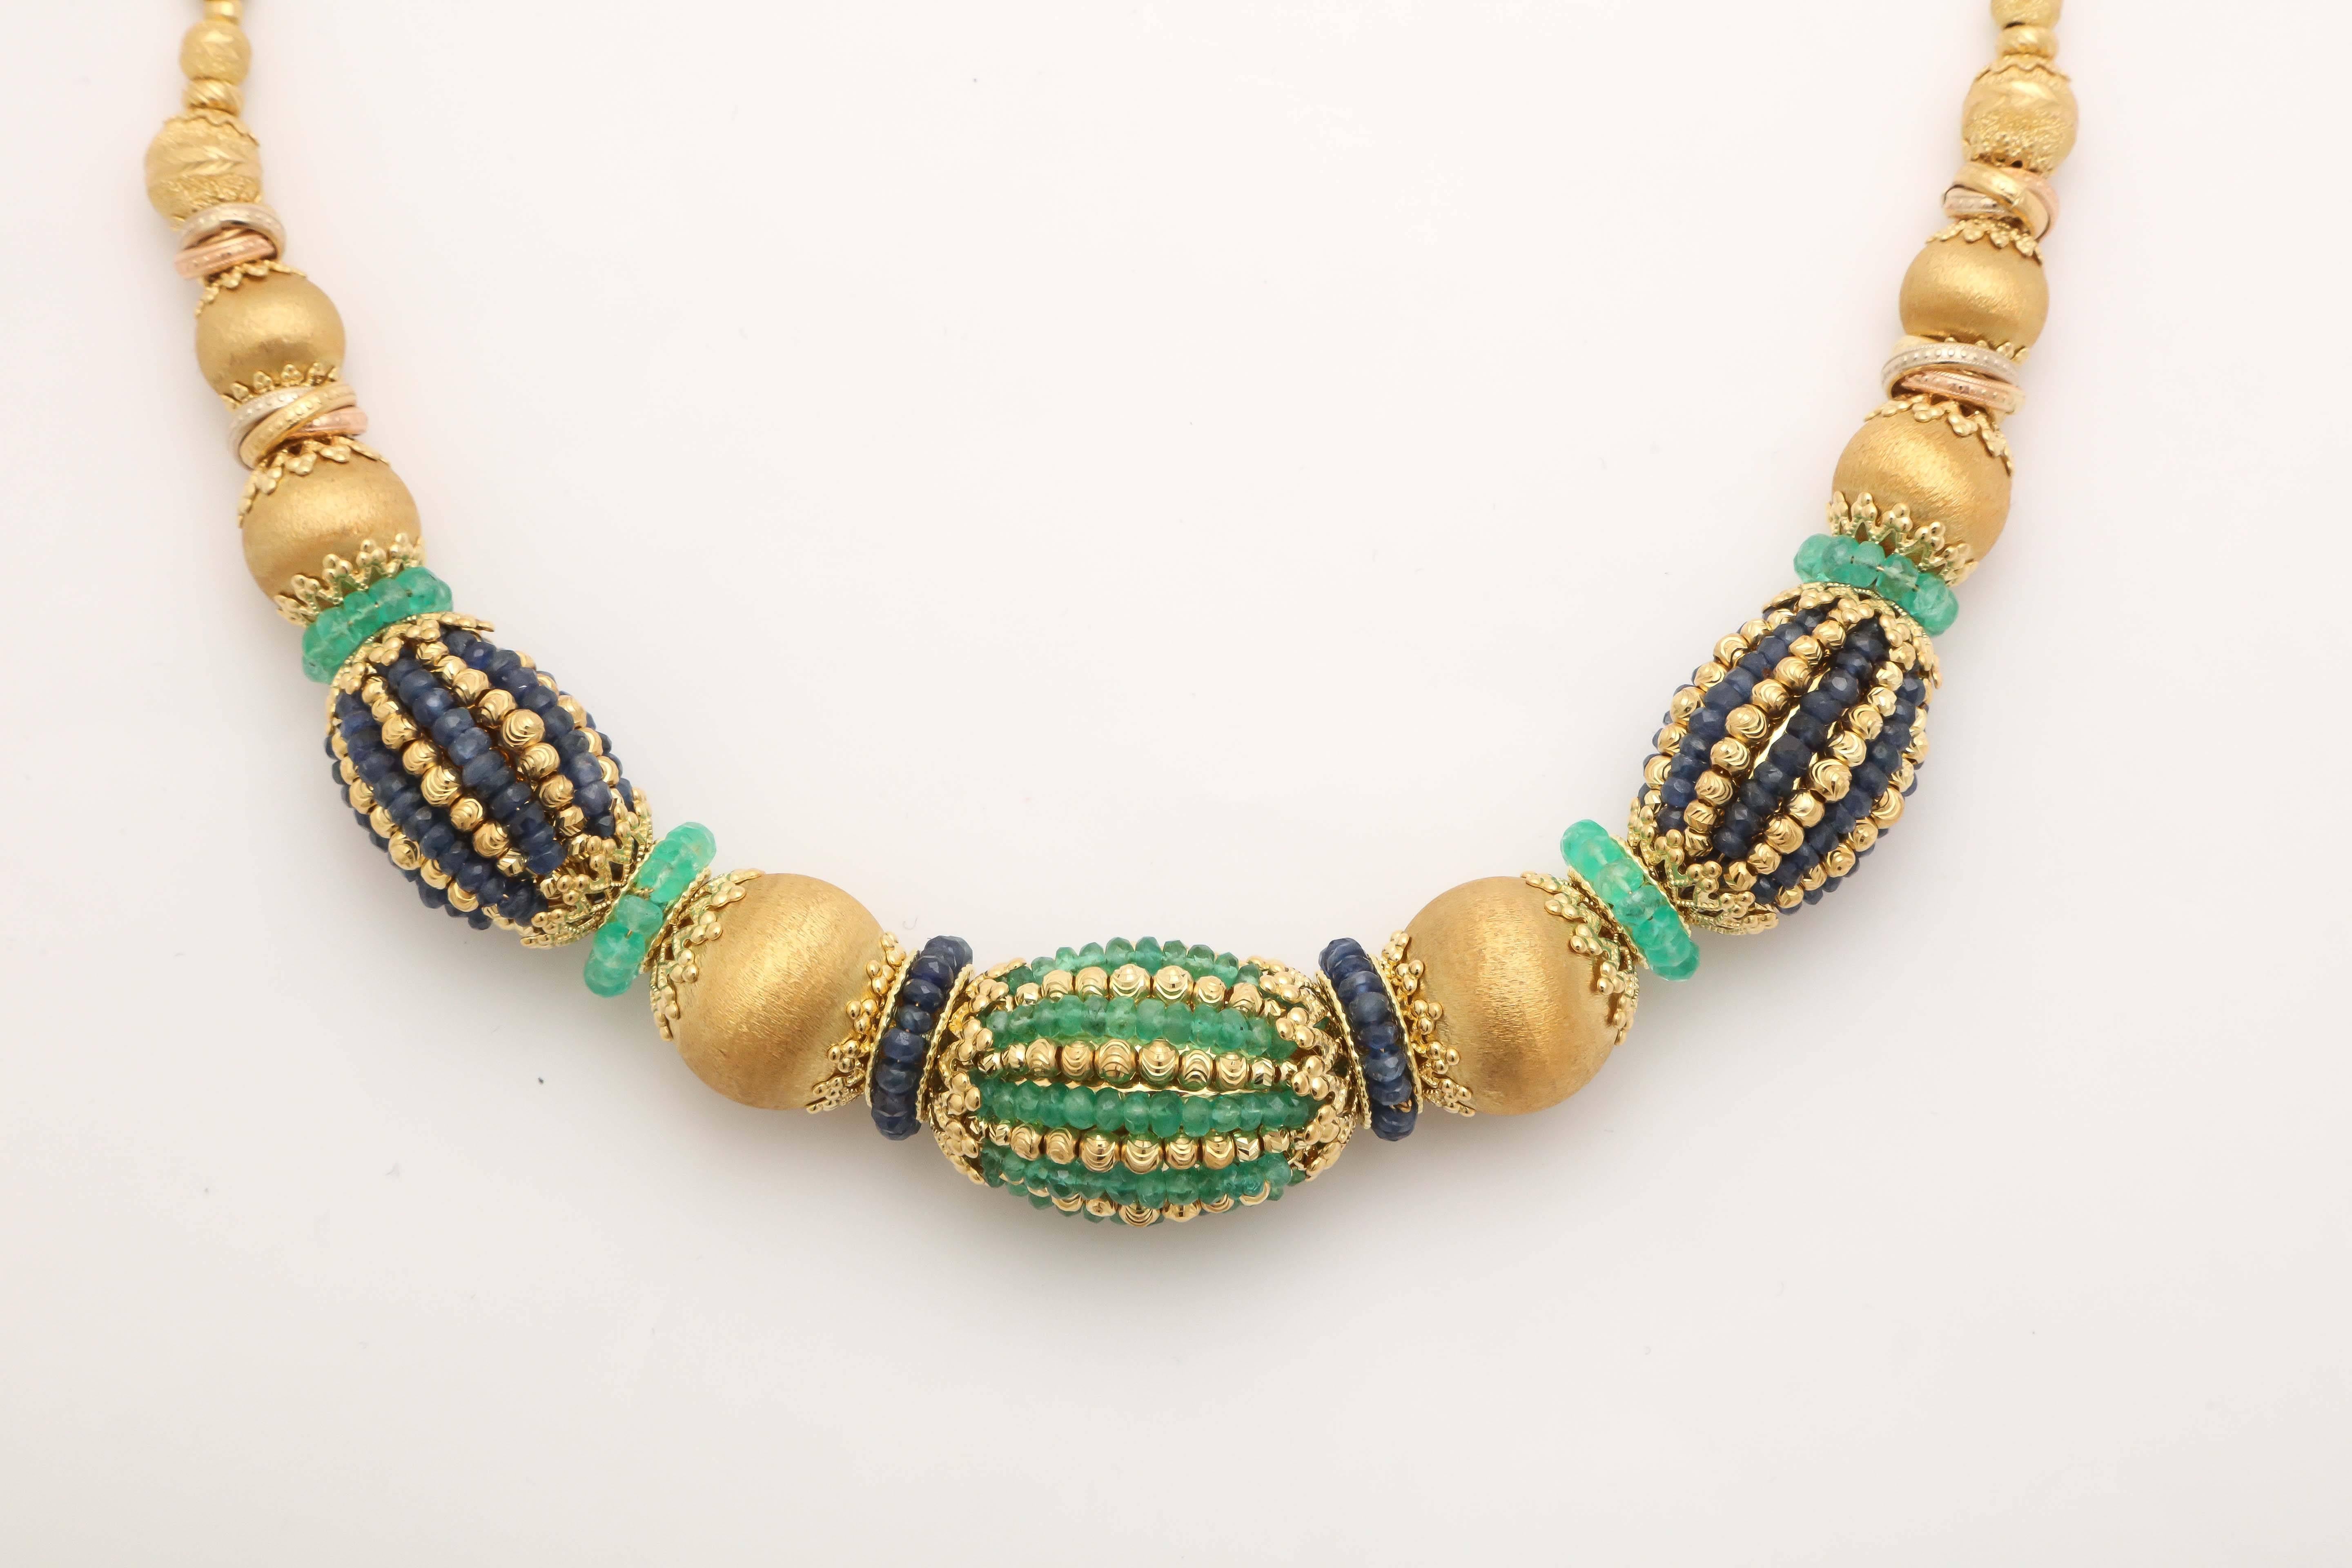 Exotic engraved Gold Beads and Rondels alternately covered with Emerald Beads and Sapphire Beads.  Very Luxe and rich looking.  Signed with tab inscribed 